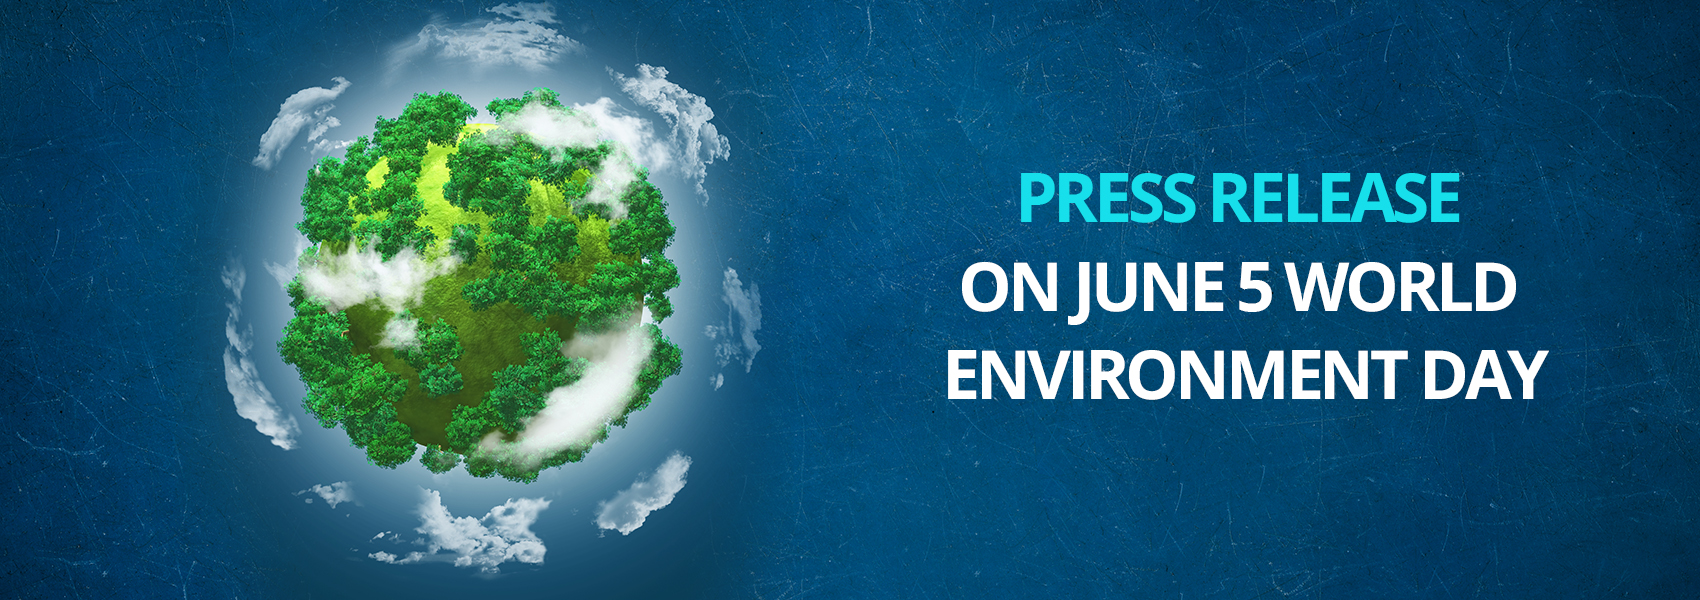 Press Release On June 5 World Environment Day